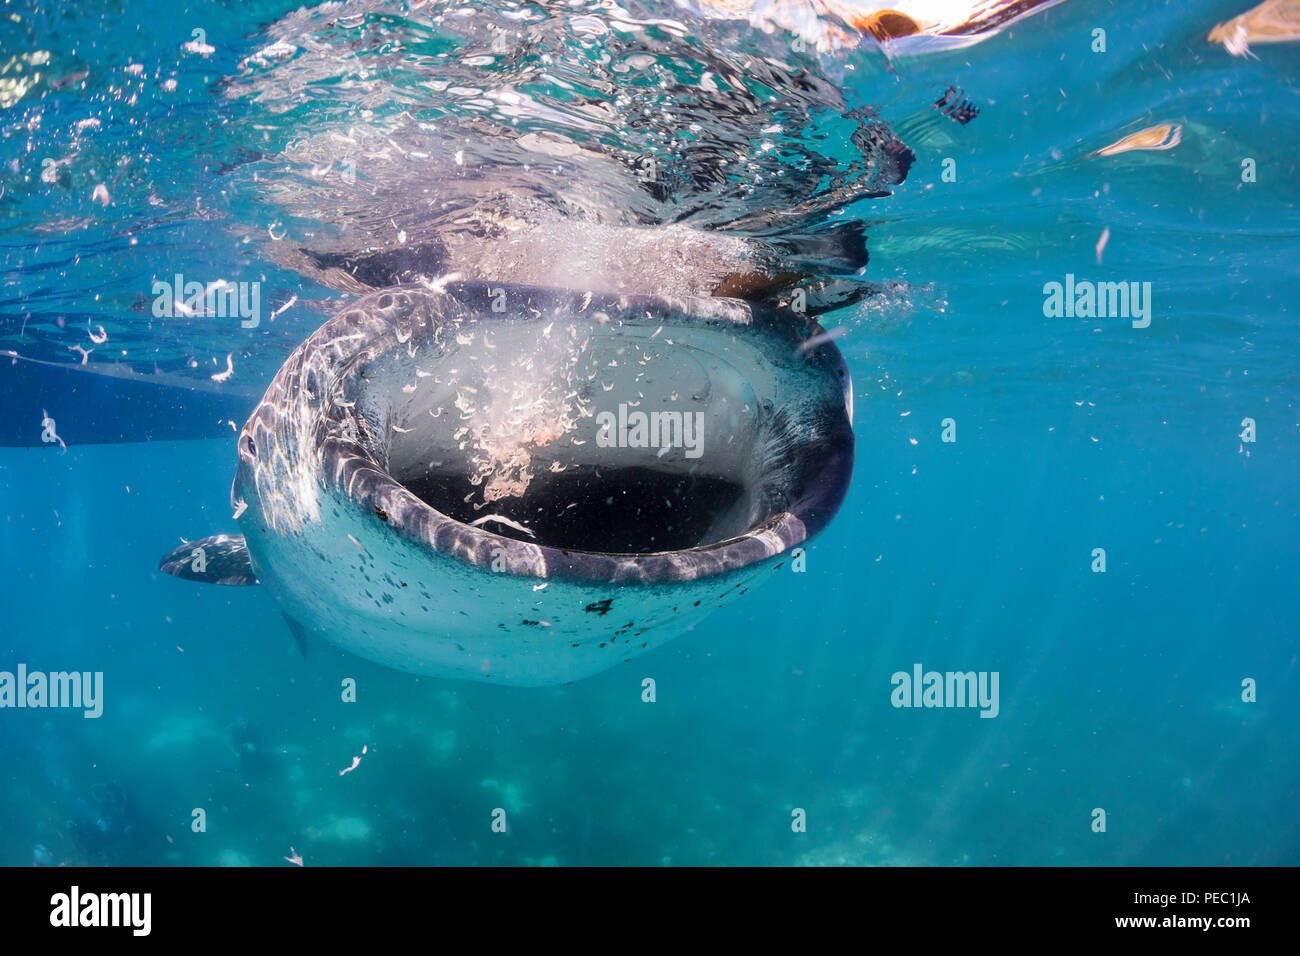 A whale shark, Rhiniodon typus, with its mouth open, feeding on shrimp at the surface, during a commercial whale shark encounter for tourists, Oslob,  Stock Photo